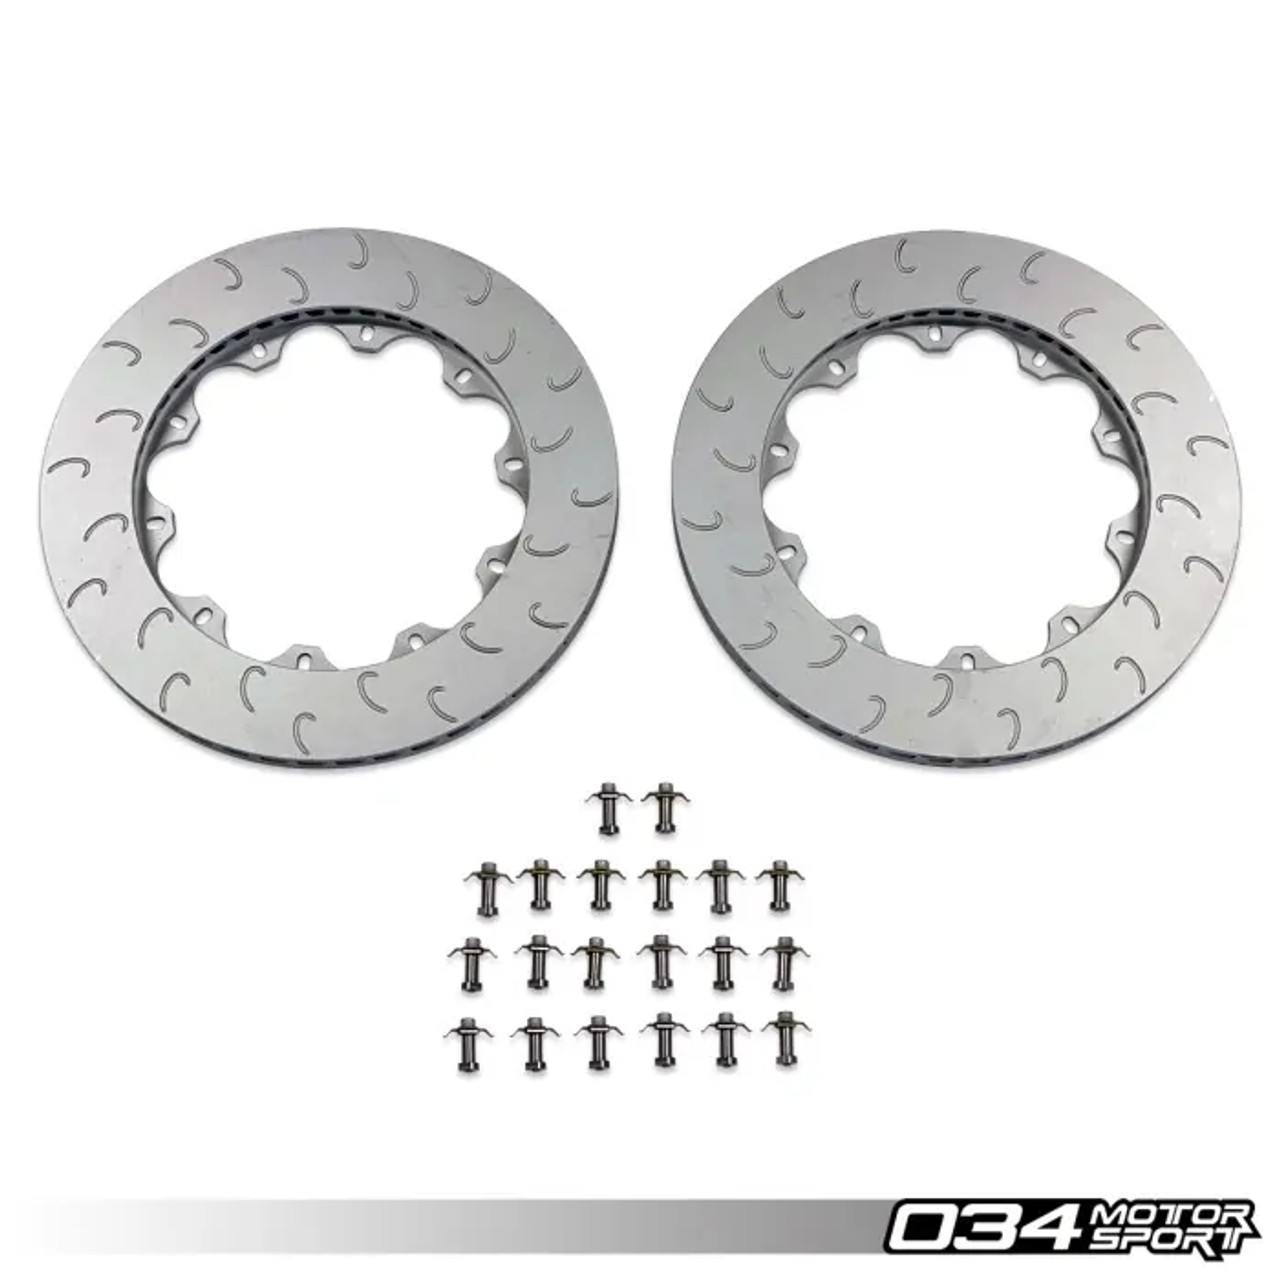 034Motorsport 370mm Replacement Rear Rotor Ring Set for F8X M2, M3 & M4